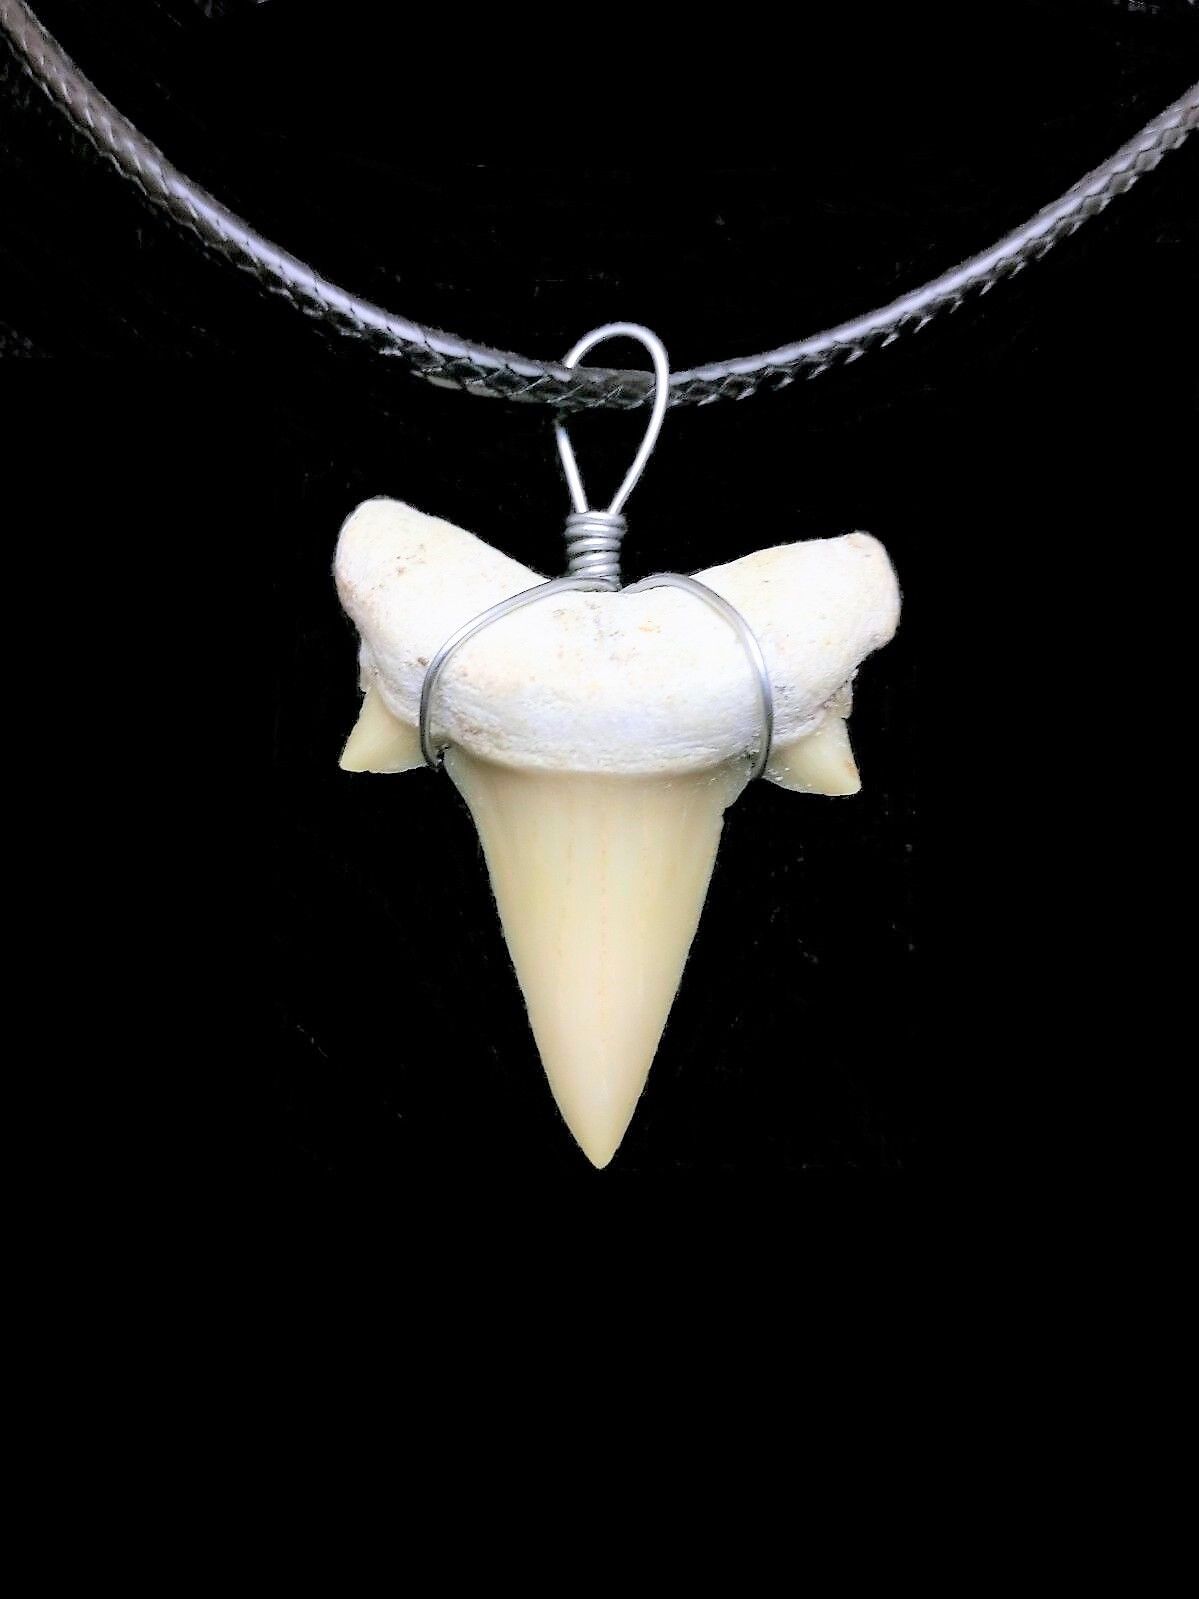 OTODUS TOOTH REAL SHARK NECKLACE FOSSIL PENDANT MEGALODON EXTINCT ANCESTOR RELIC